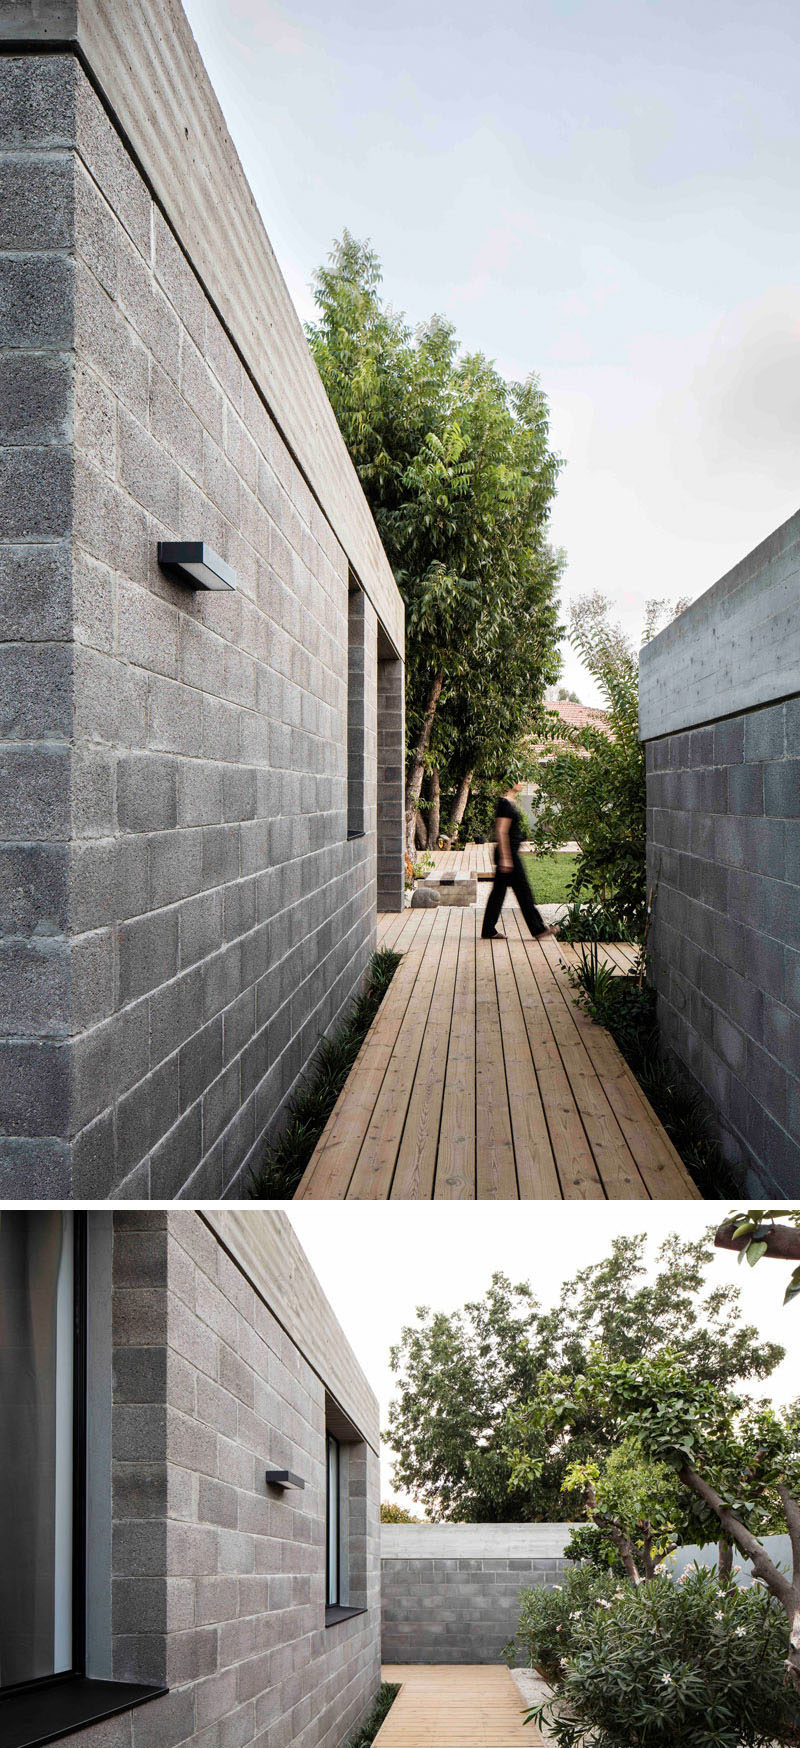 This modern house used raw concrete blocks and a concrete roof in its construction. Wood paths lead you around the house.